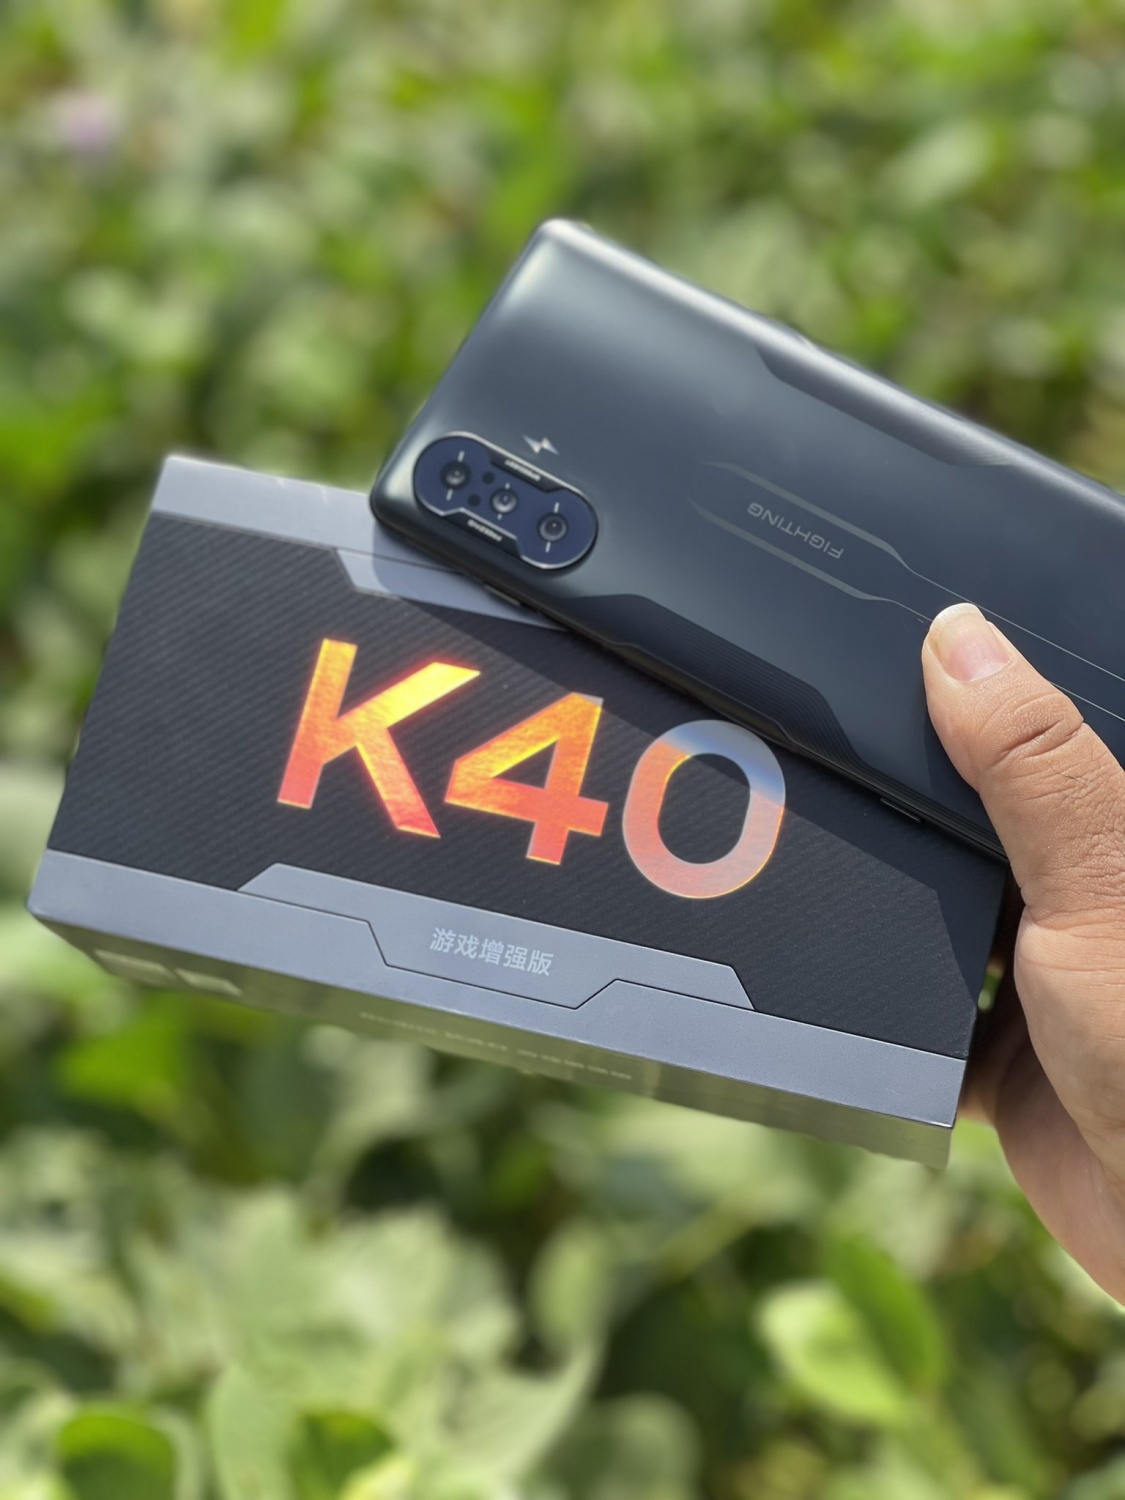 New Redmi K40 Gaming Phone Could Come with Dimensity 1100 Chipset, 67W Ultra-Fast Charging–Leaker Reveals